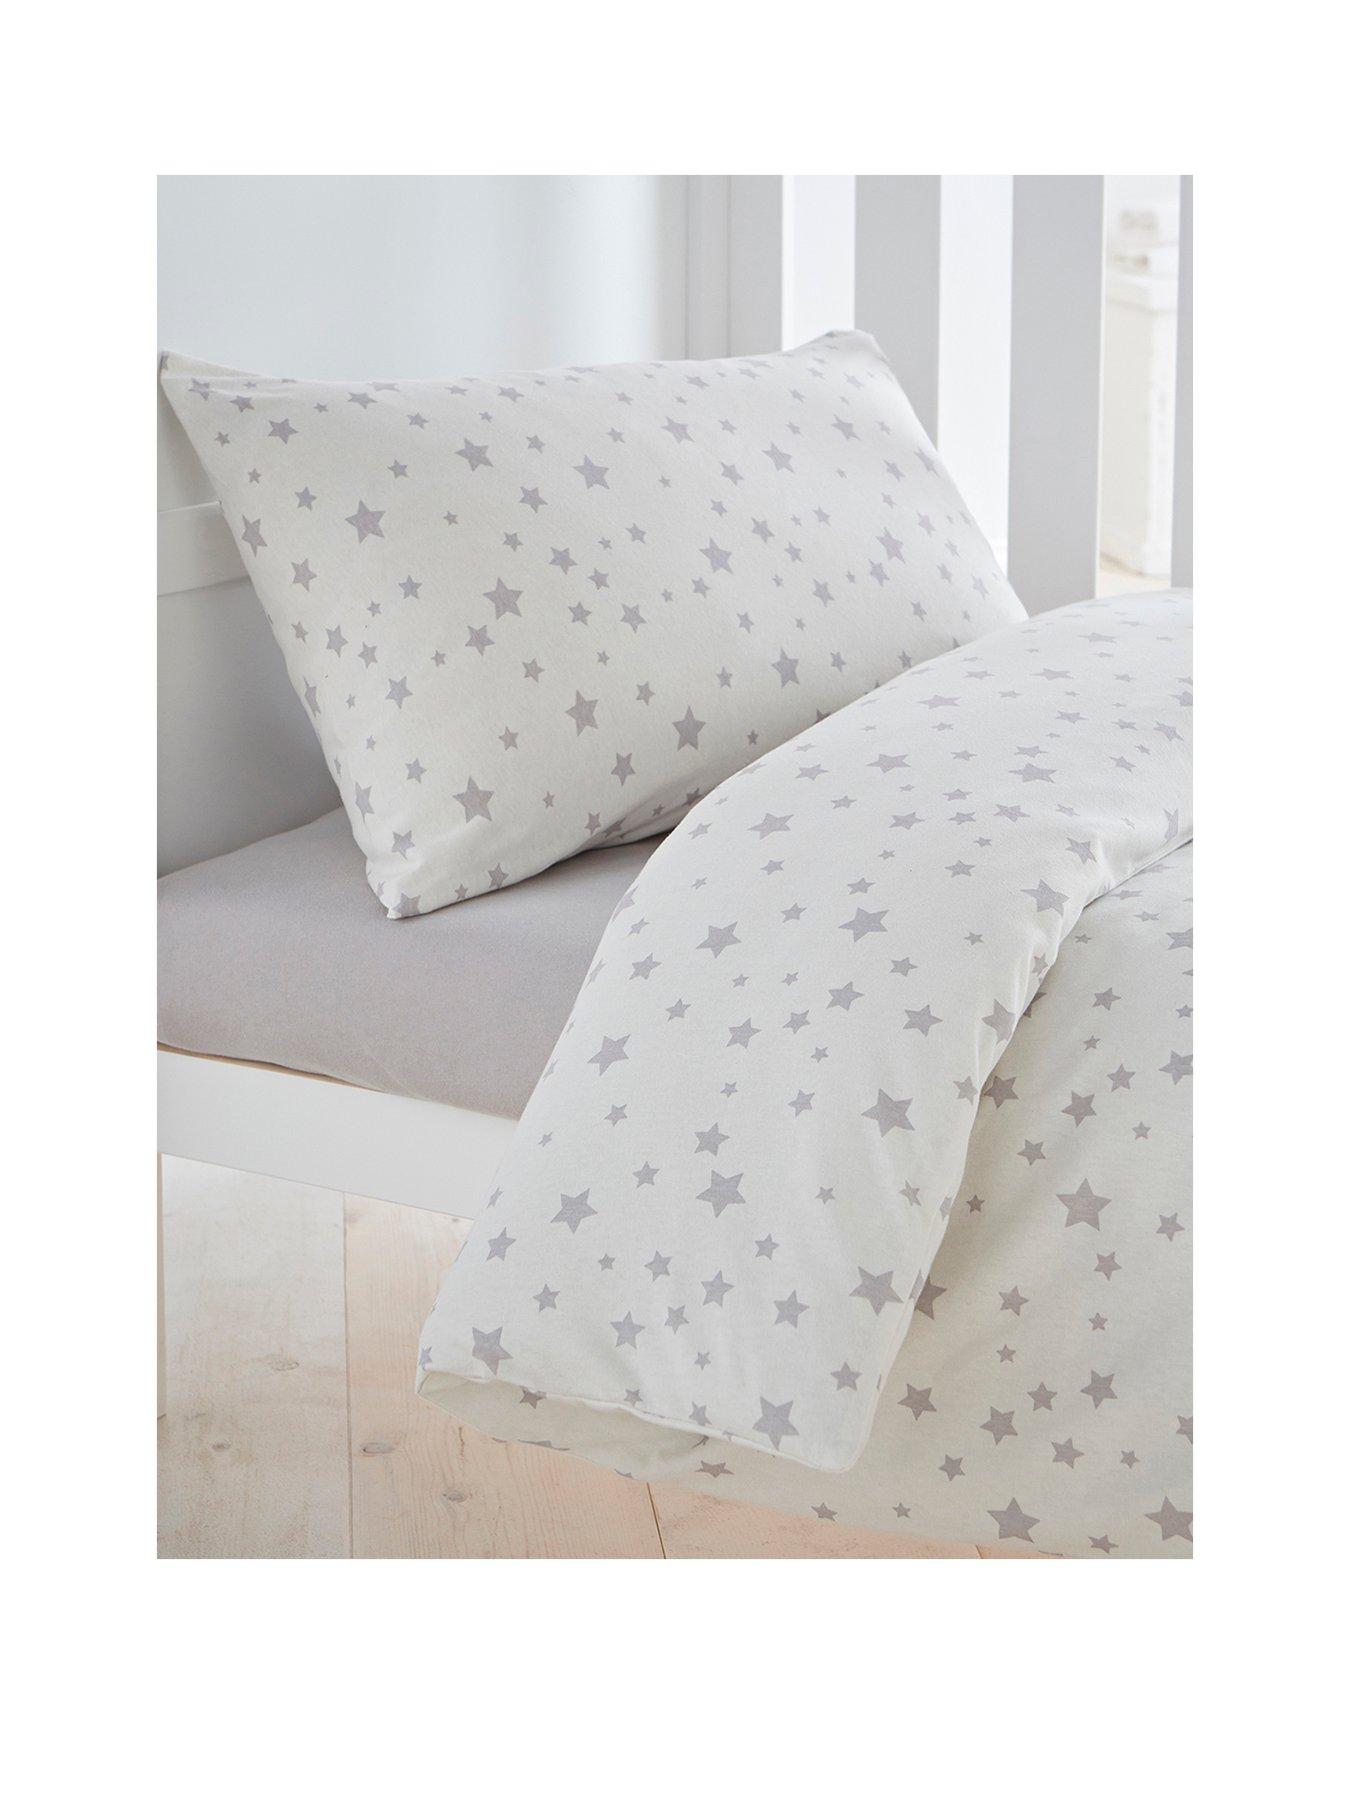 cot quilt covers uk